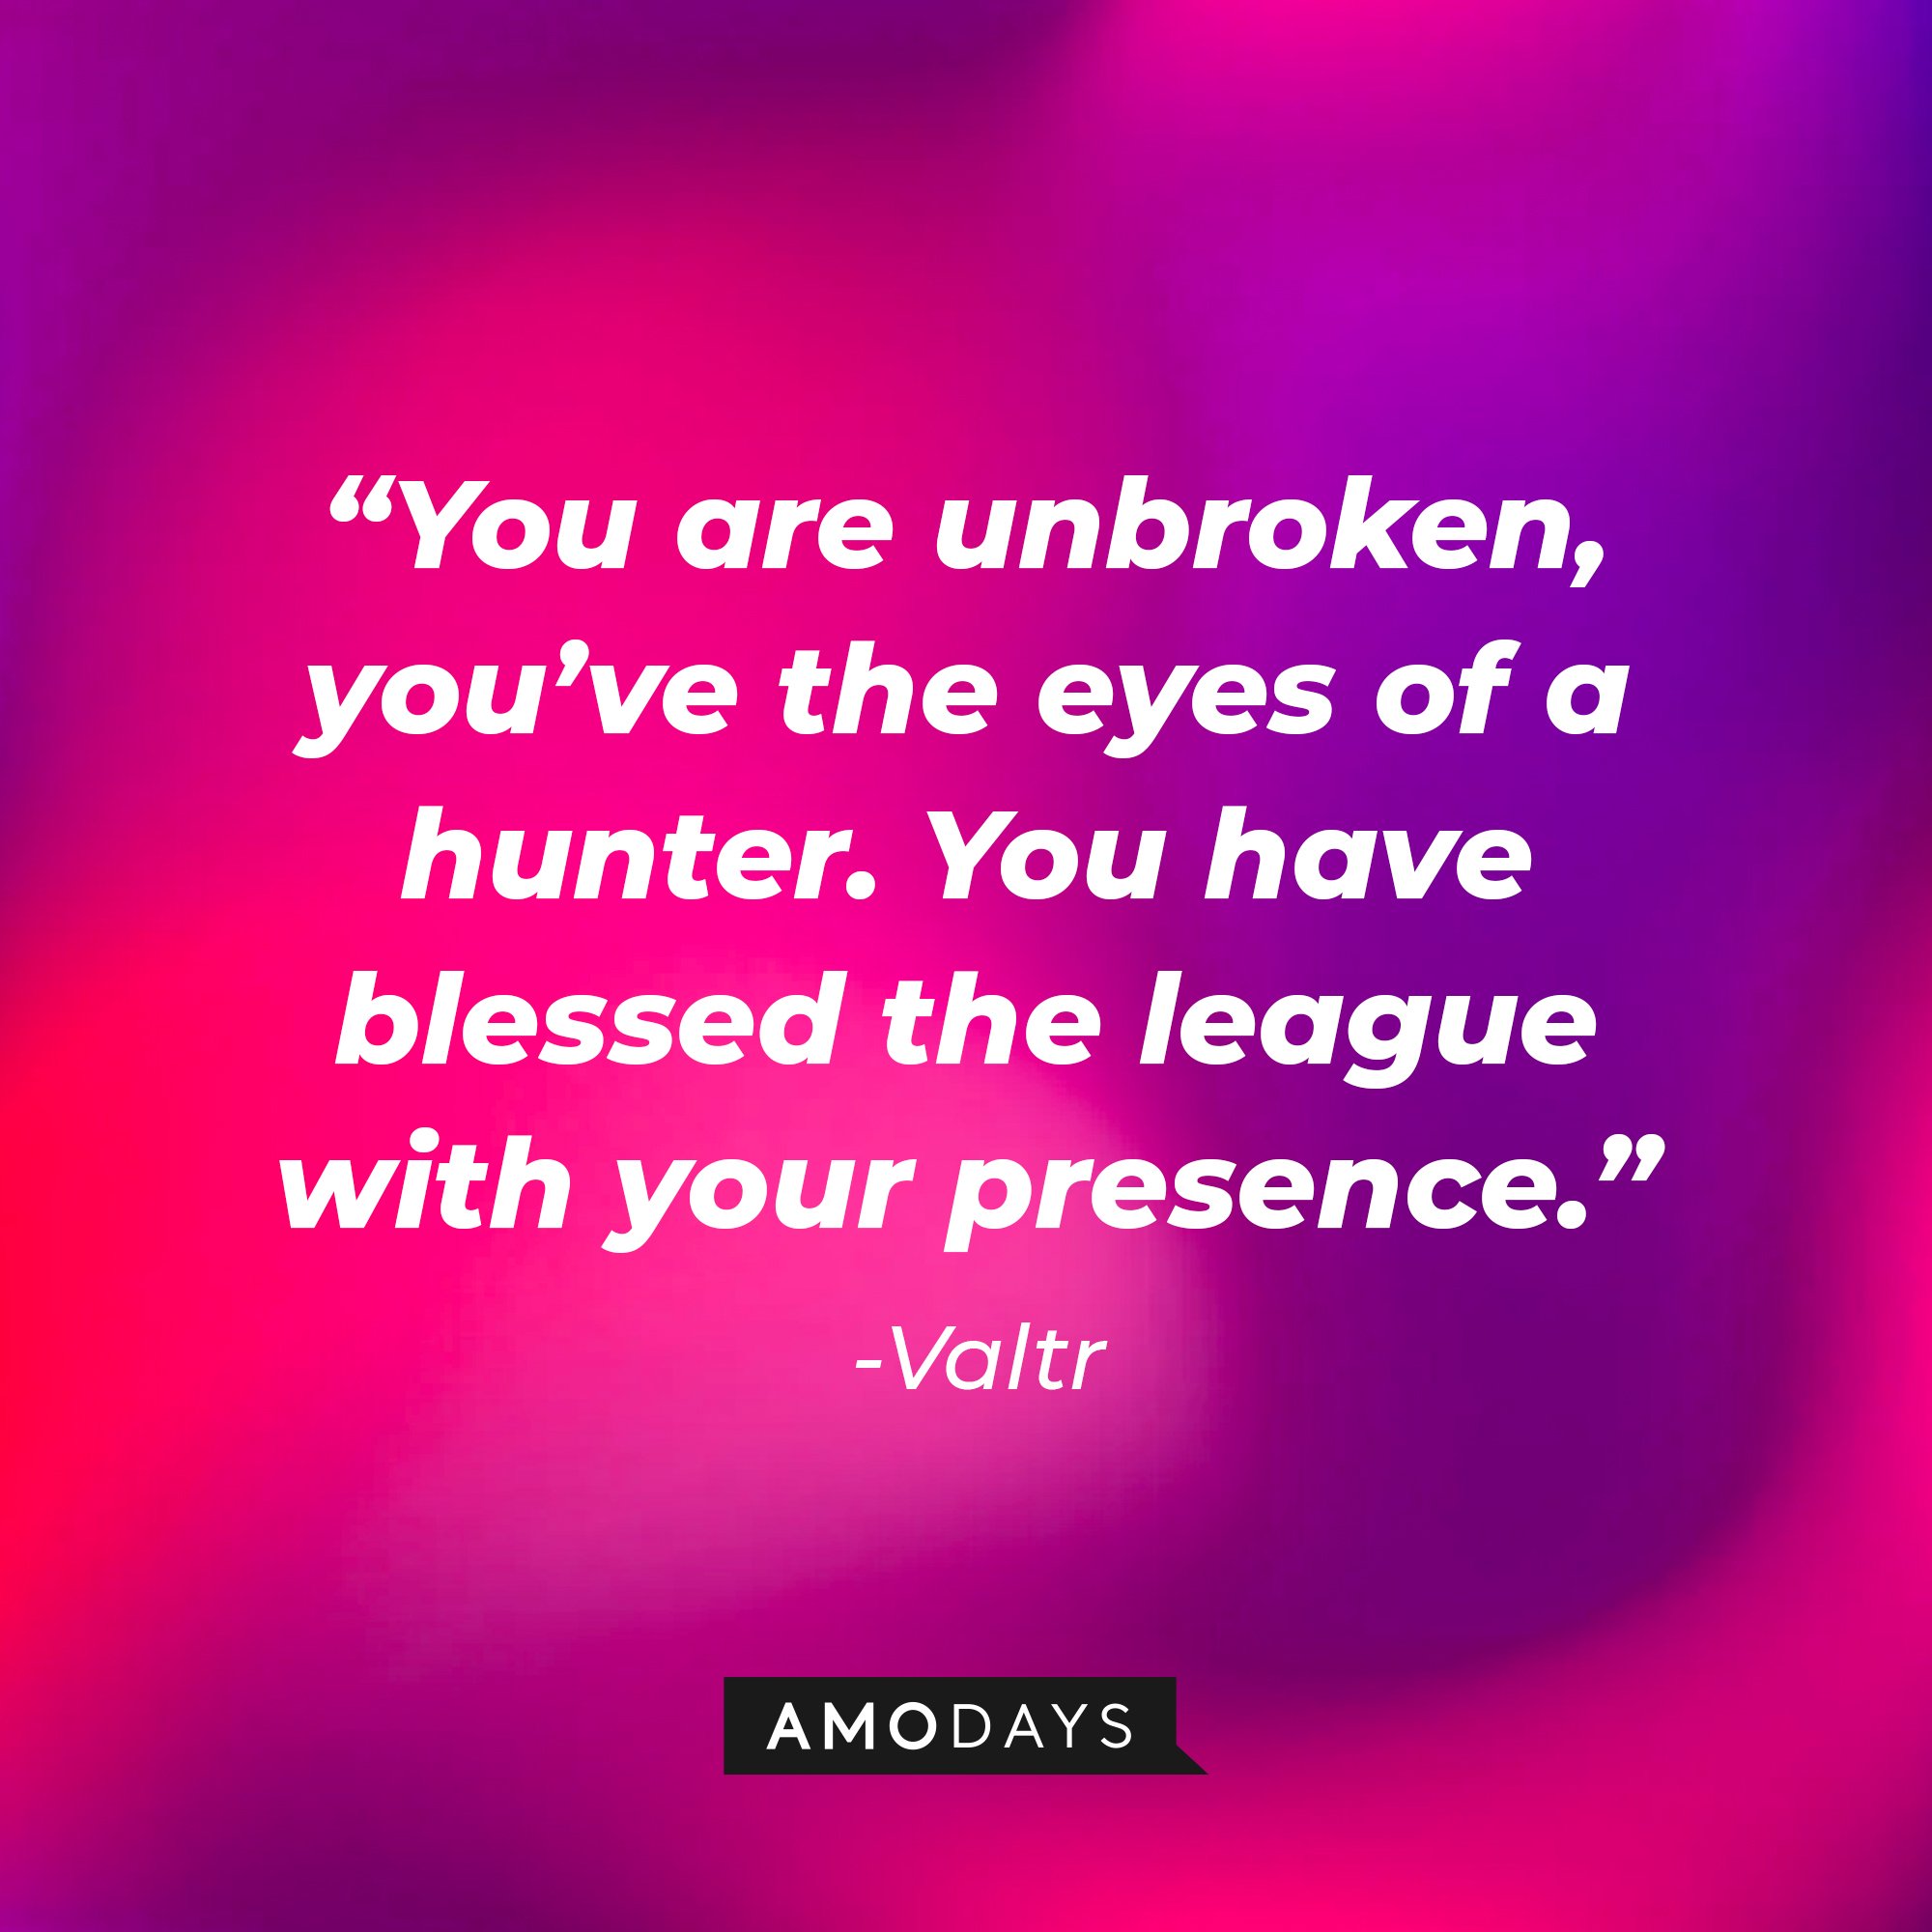 Valtr's quote: "You are unbroken, you’ve the eyes of a hunter. You have blessed the league with your presence." | Image: AmoDays